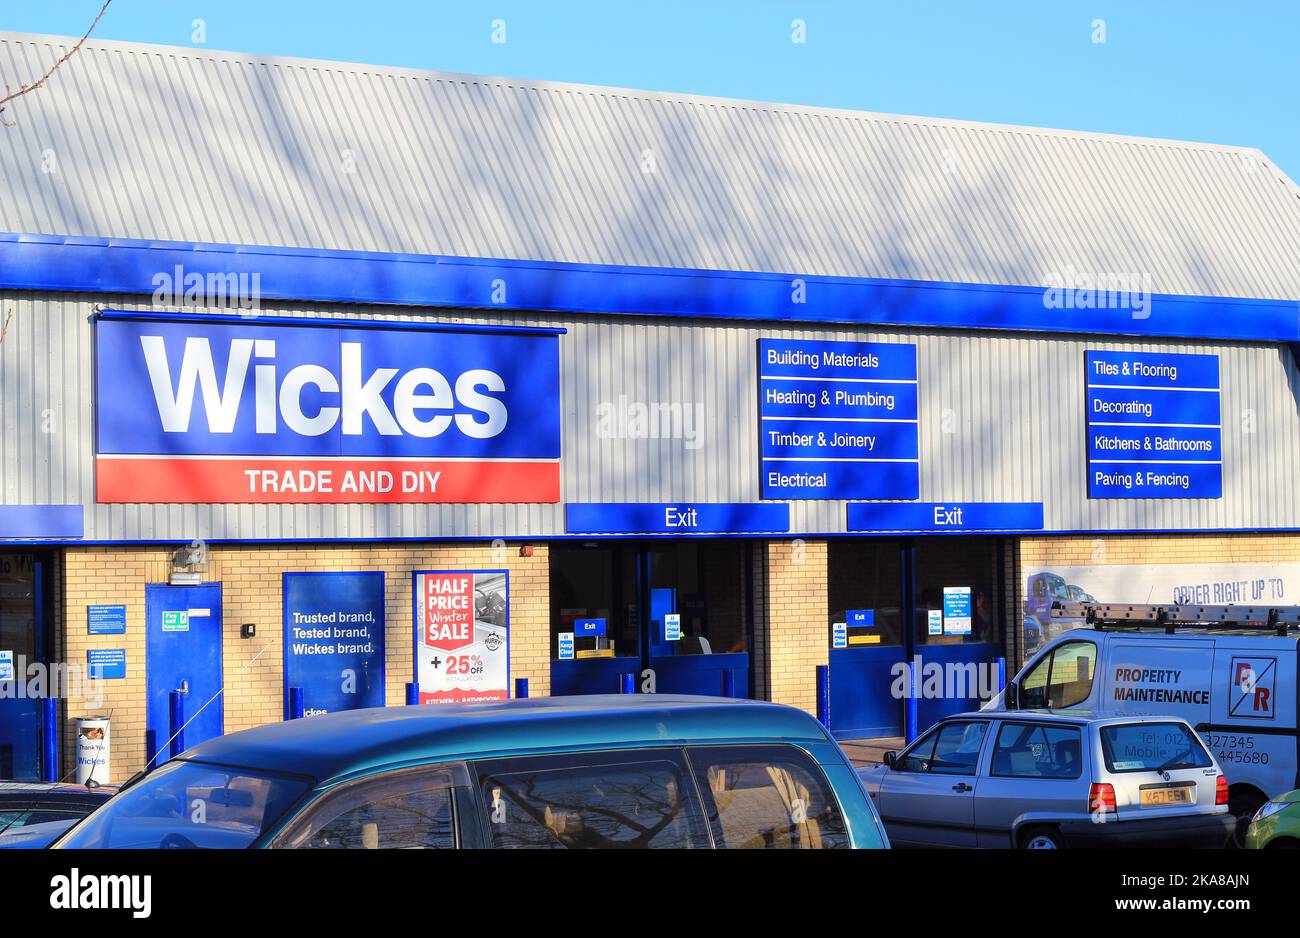 Wickes home improvement store and do it yourself. Builders' supplies. Stock Photo